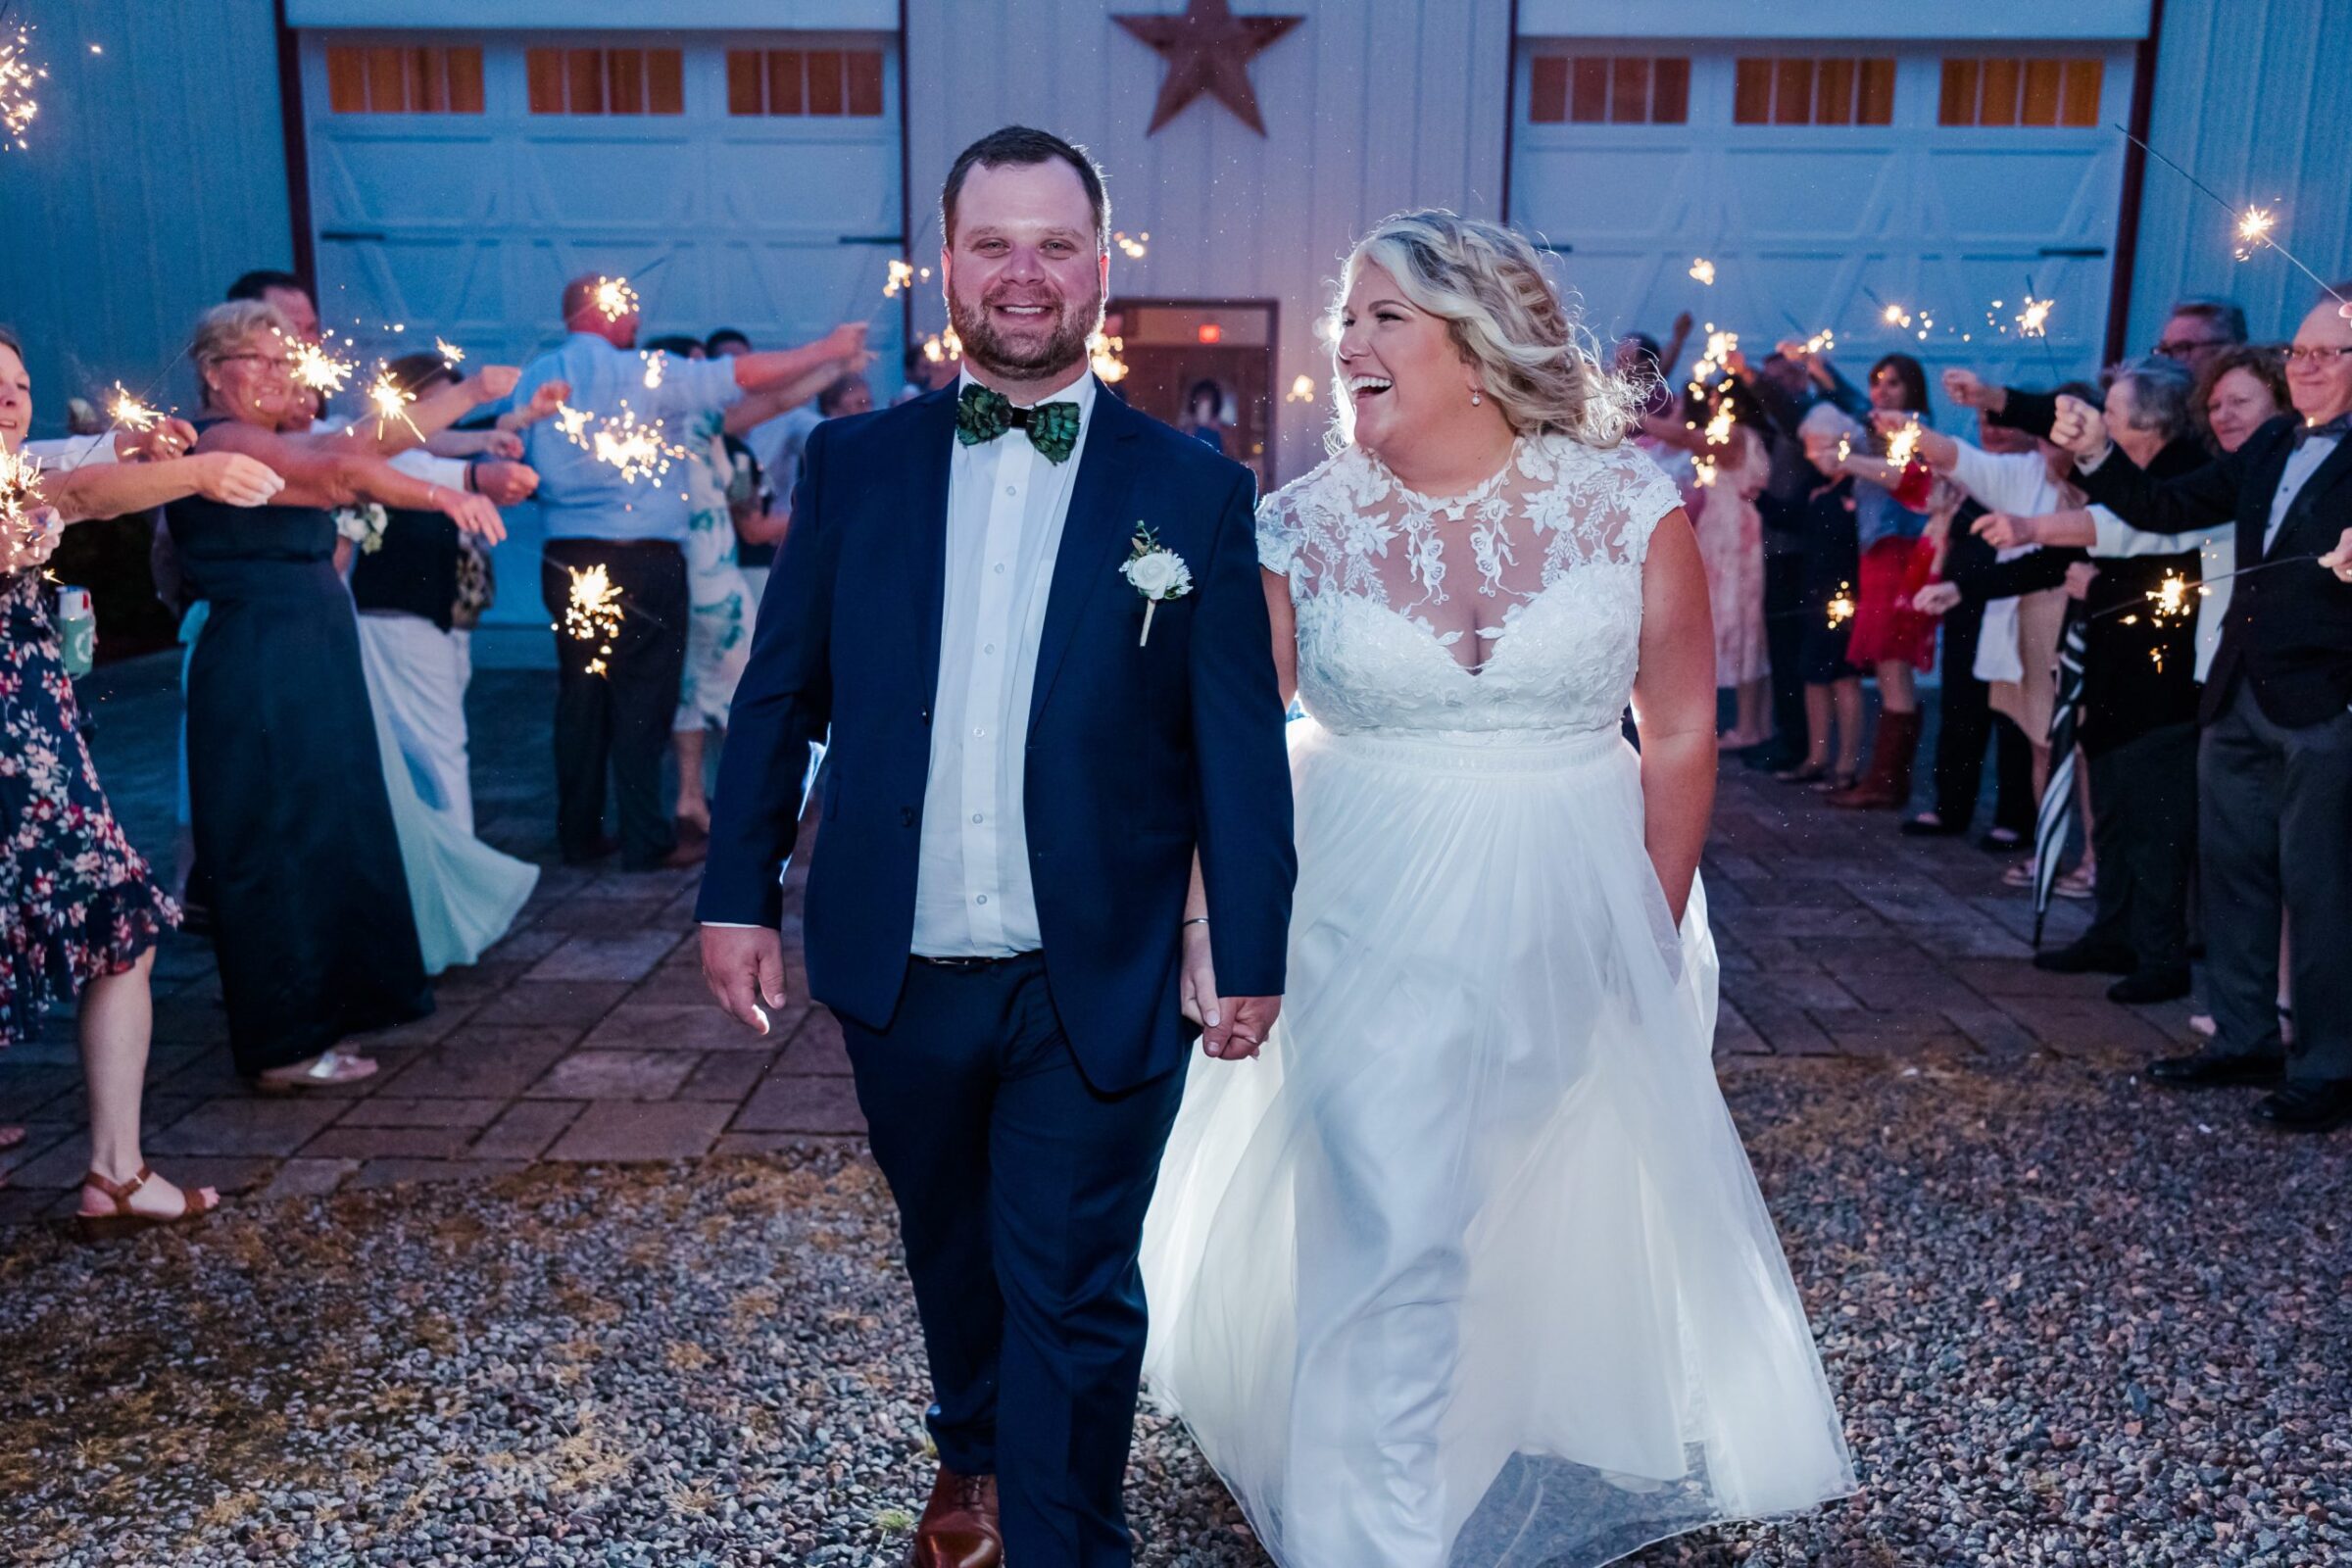 Bride and groom emerging from sparkler exit after their wedding in Virginia